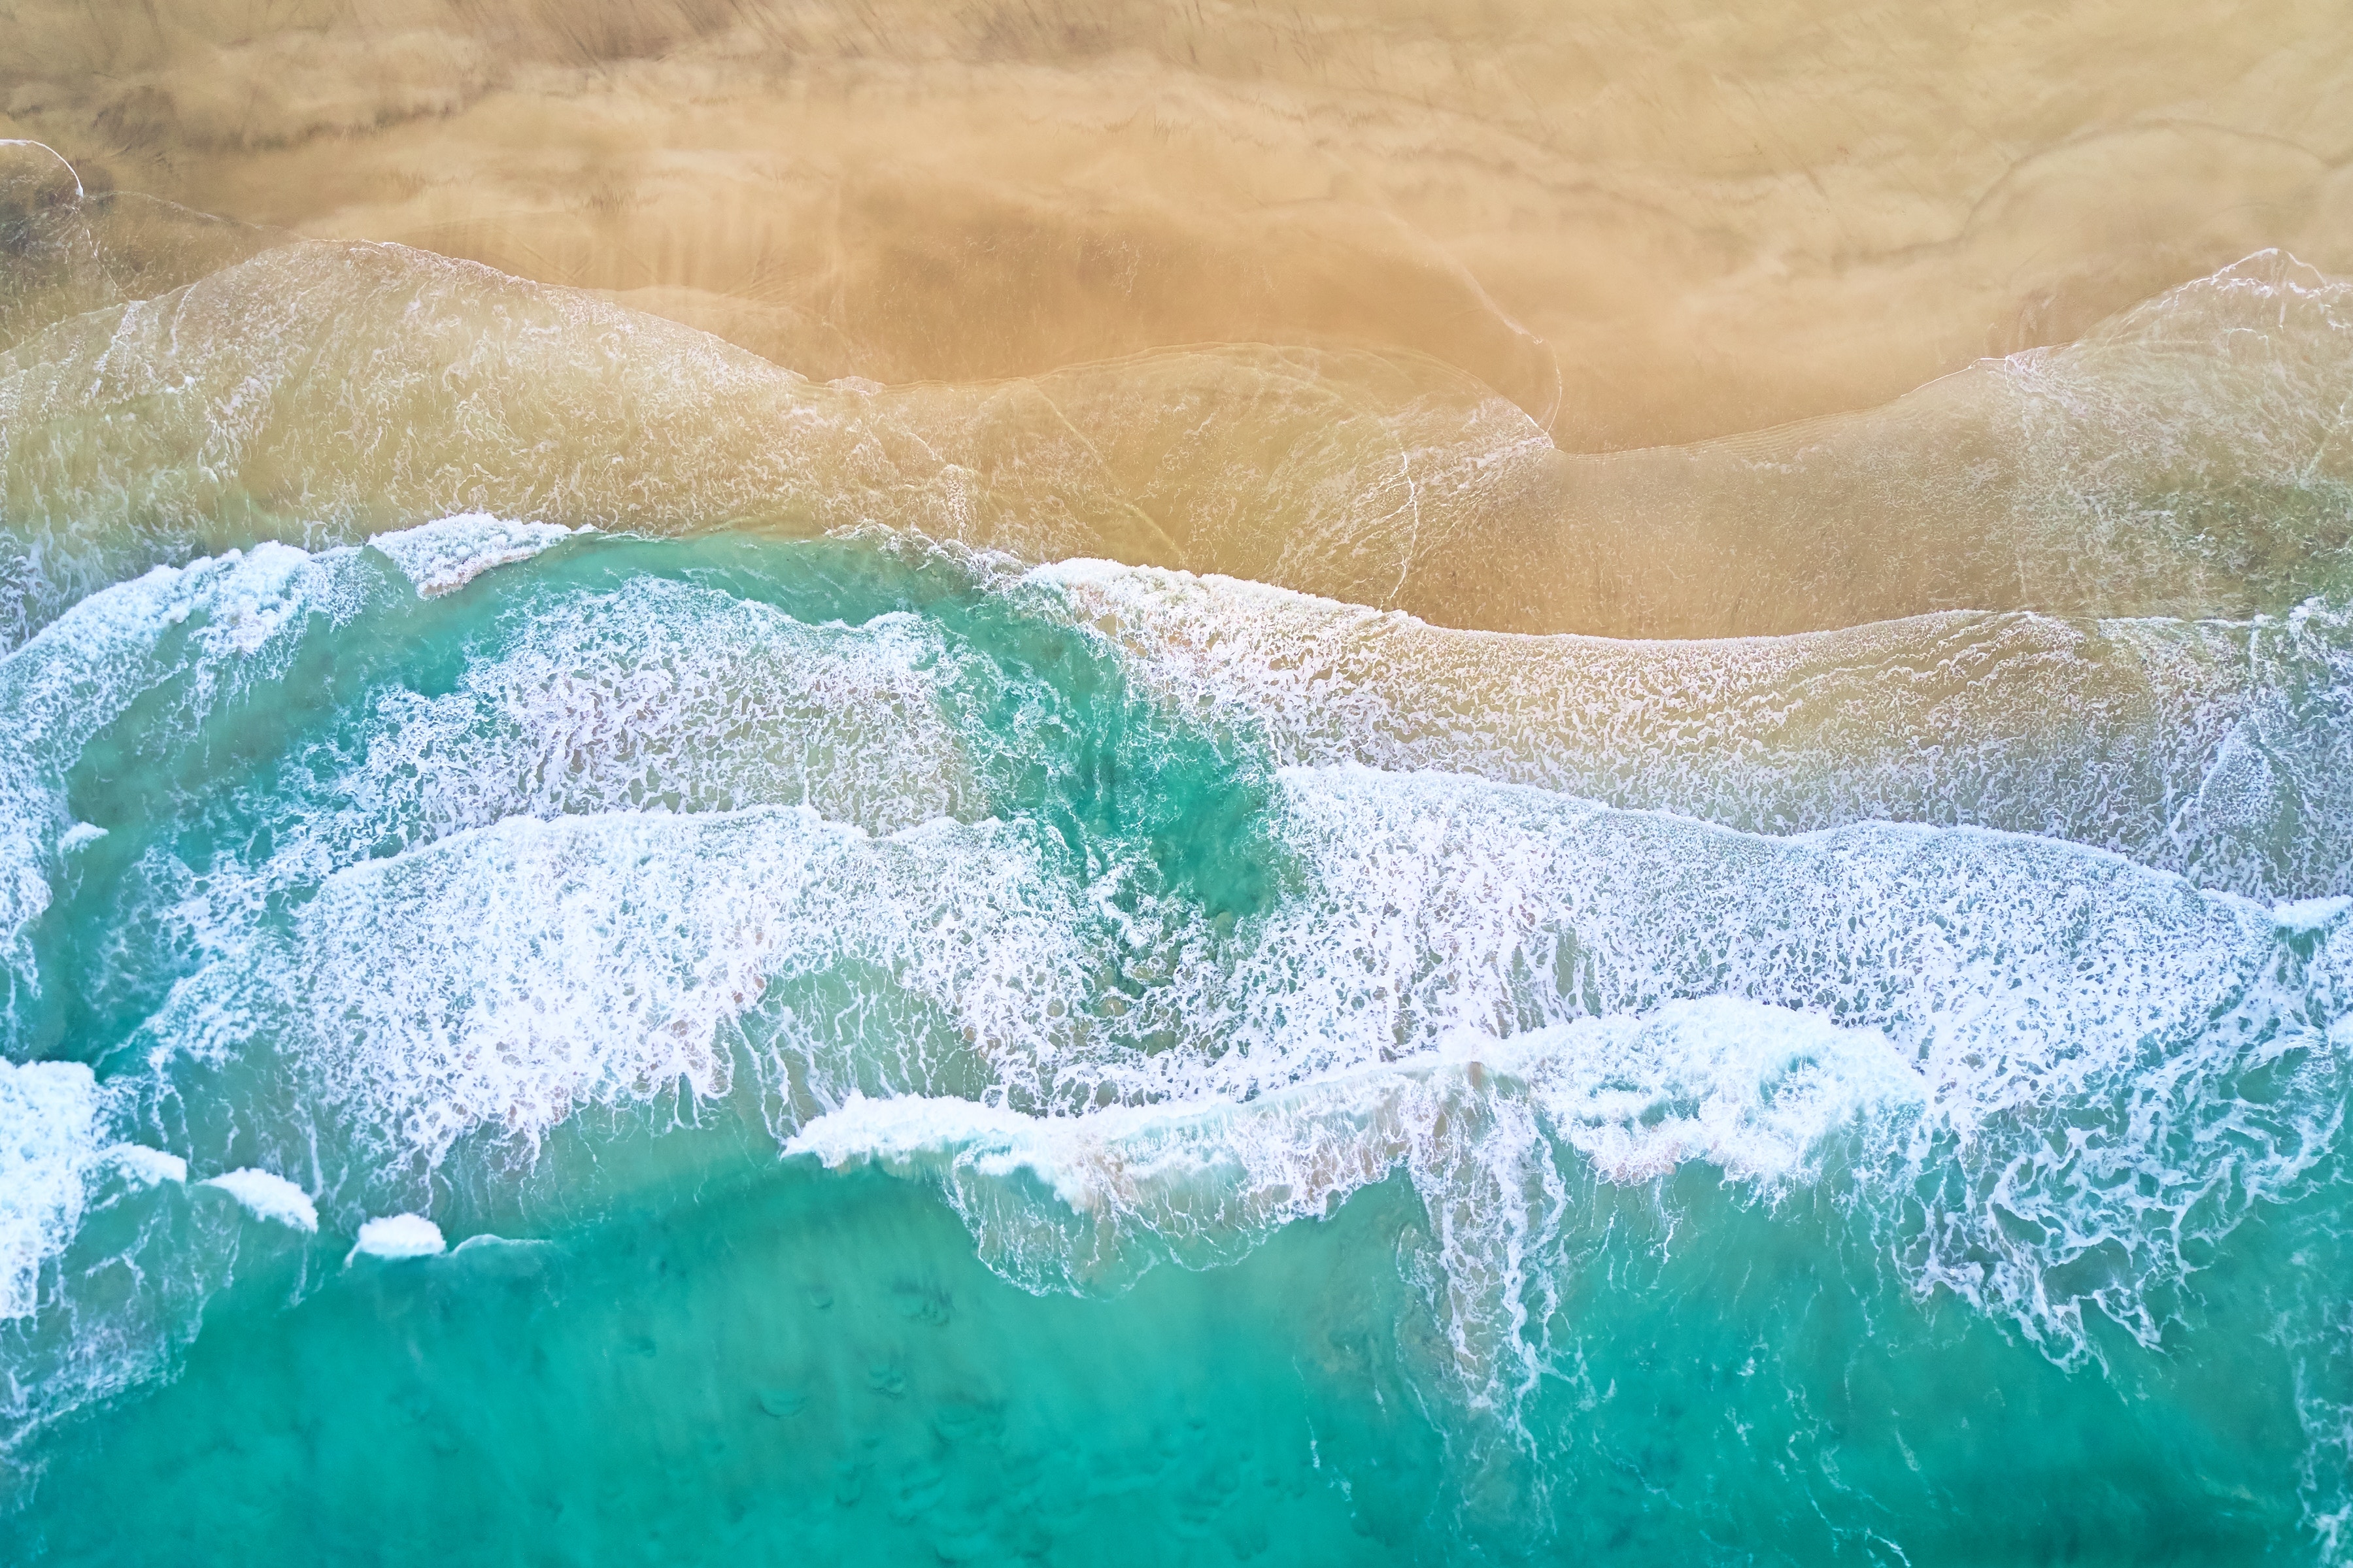 3599x2399 #wave, #drone view, #paradise, #norway, #sand, #beach, #topdown, #shore, #water, #drone, #aerial, #white, #turquoise, #lofoten, #shoreline, #movement, #Free image, #green, #blue, #aerial view, #ocean. Mocah HD Wallpaper